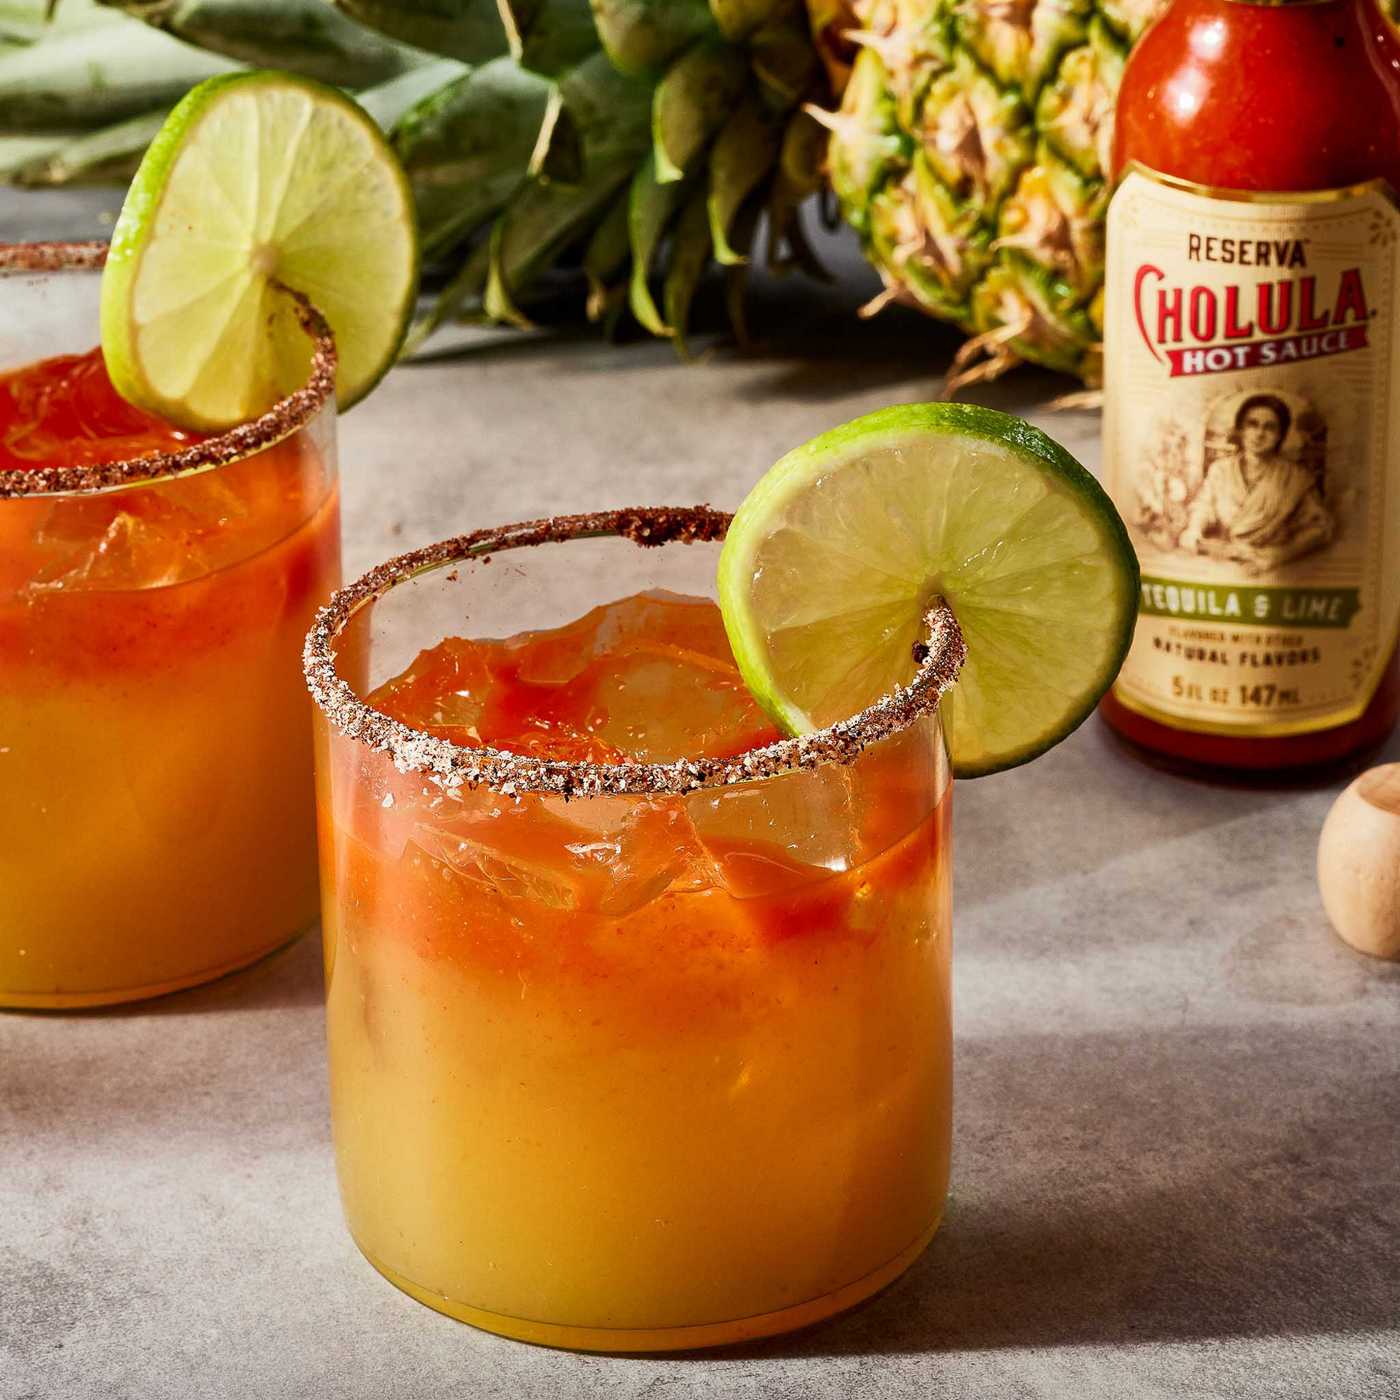 Cholula Cholula® Reserva Tequila & Lime Flavored with Other Natural Flavors Hot Sauce, 5 fl oz Hot Sauce; image 2 of 7